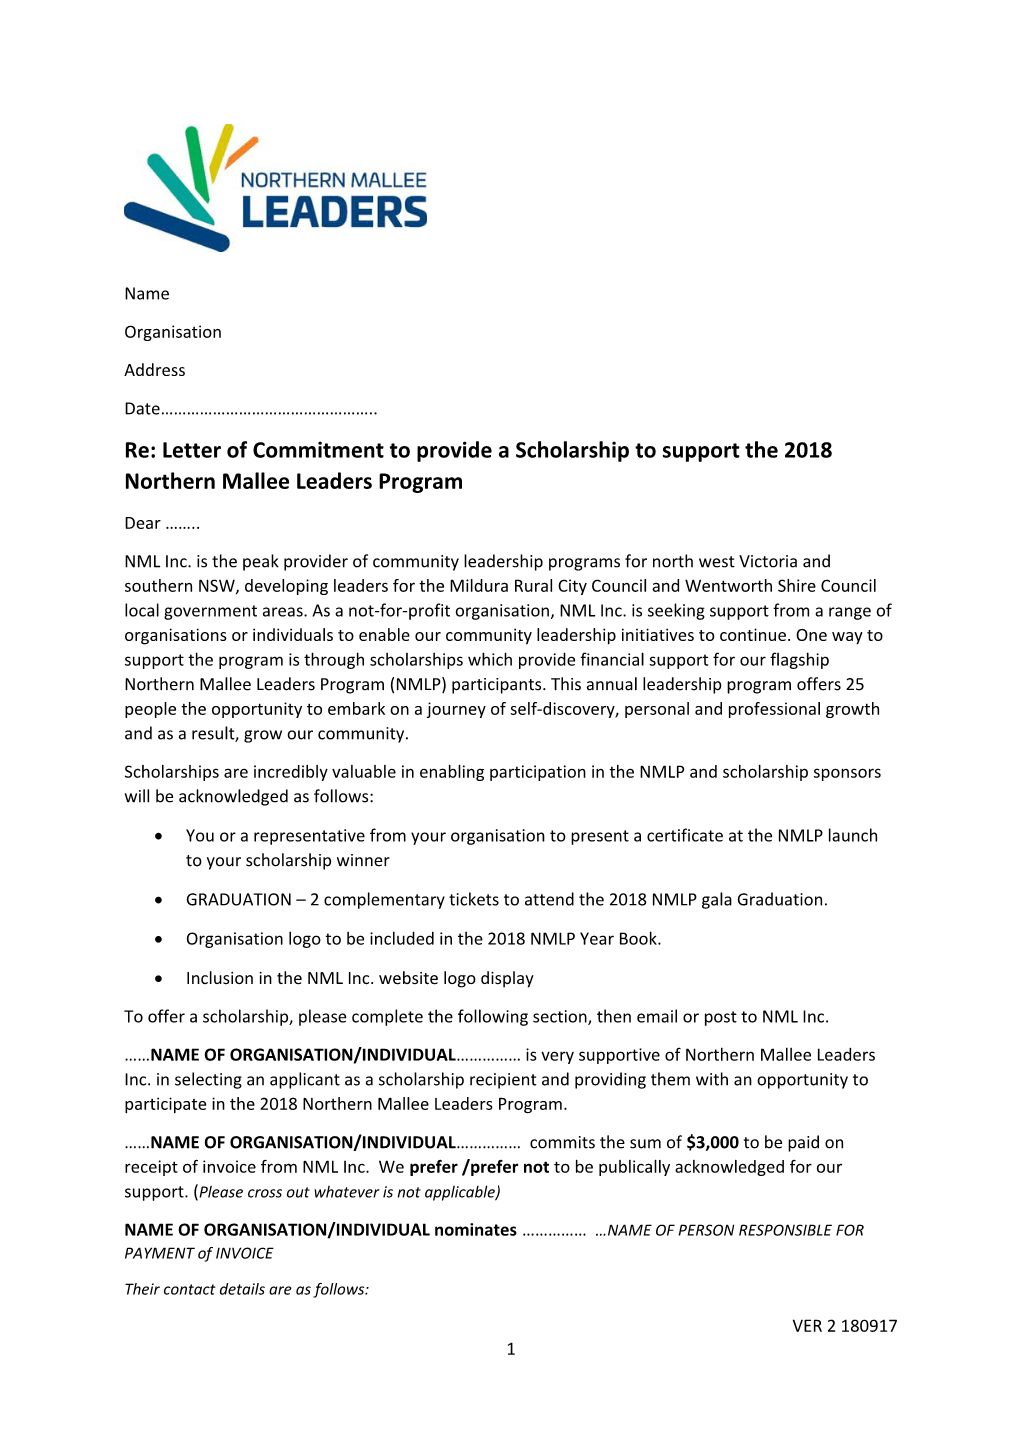 Re: Letter of Commitment to Provide a Scholarship to Support the 2018 Northern Mallee